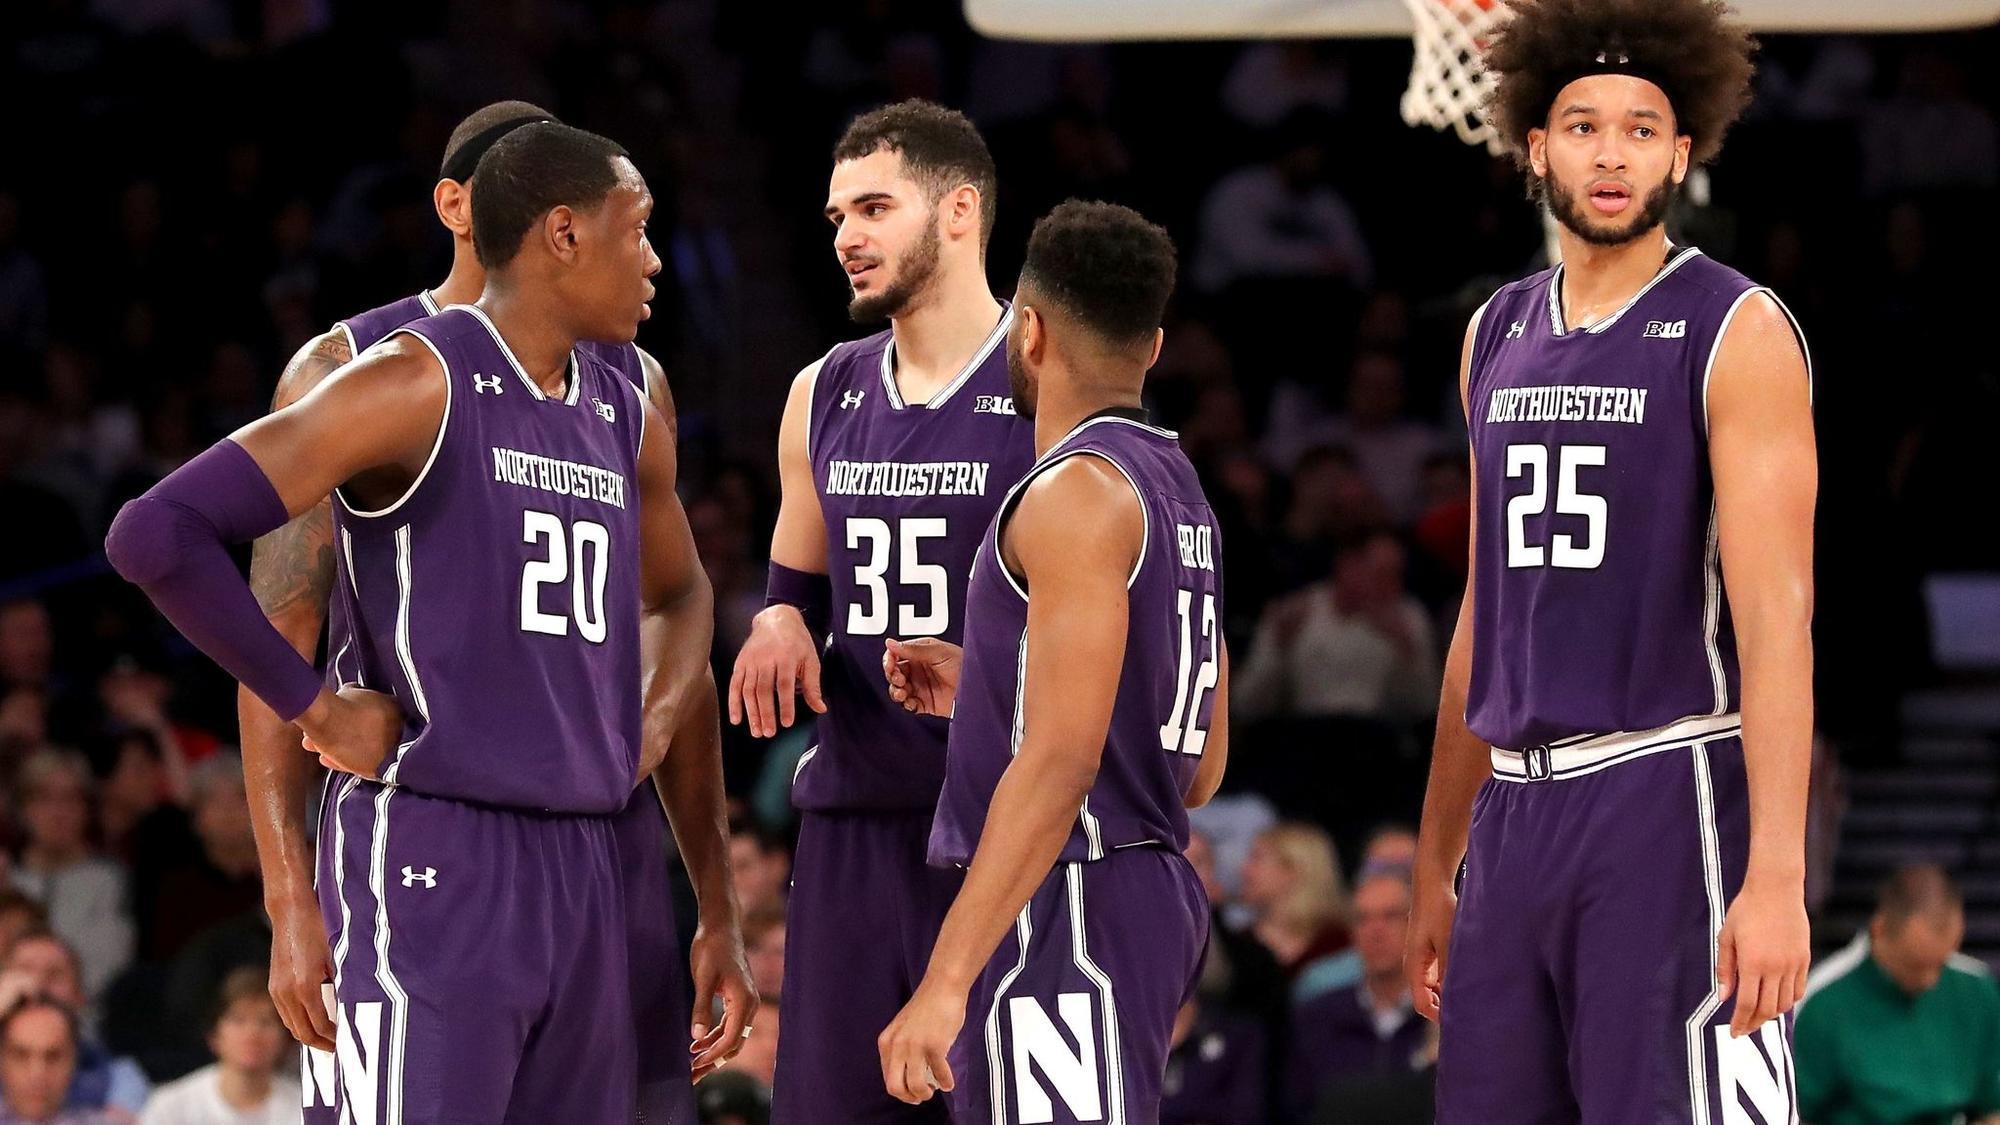 Fresh start for Northwestern next season begins with new gym and a talented freshman class